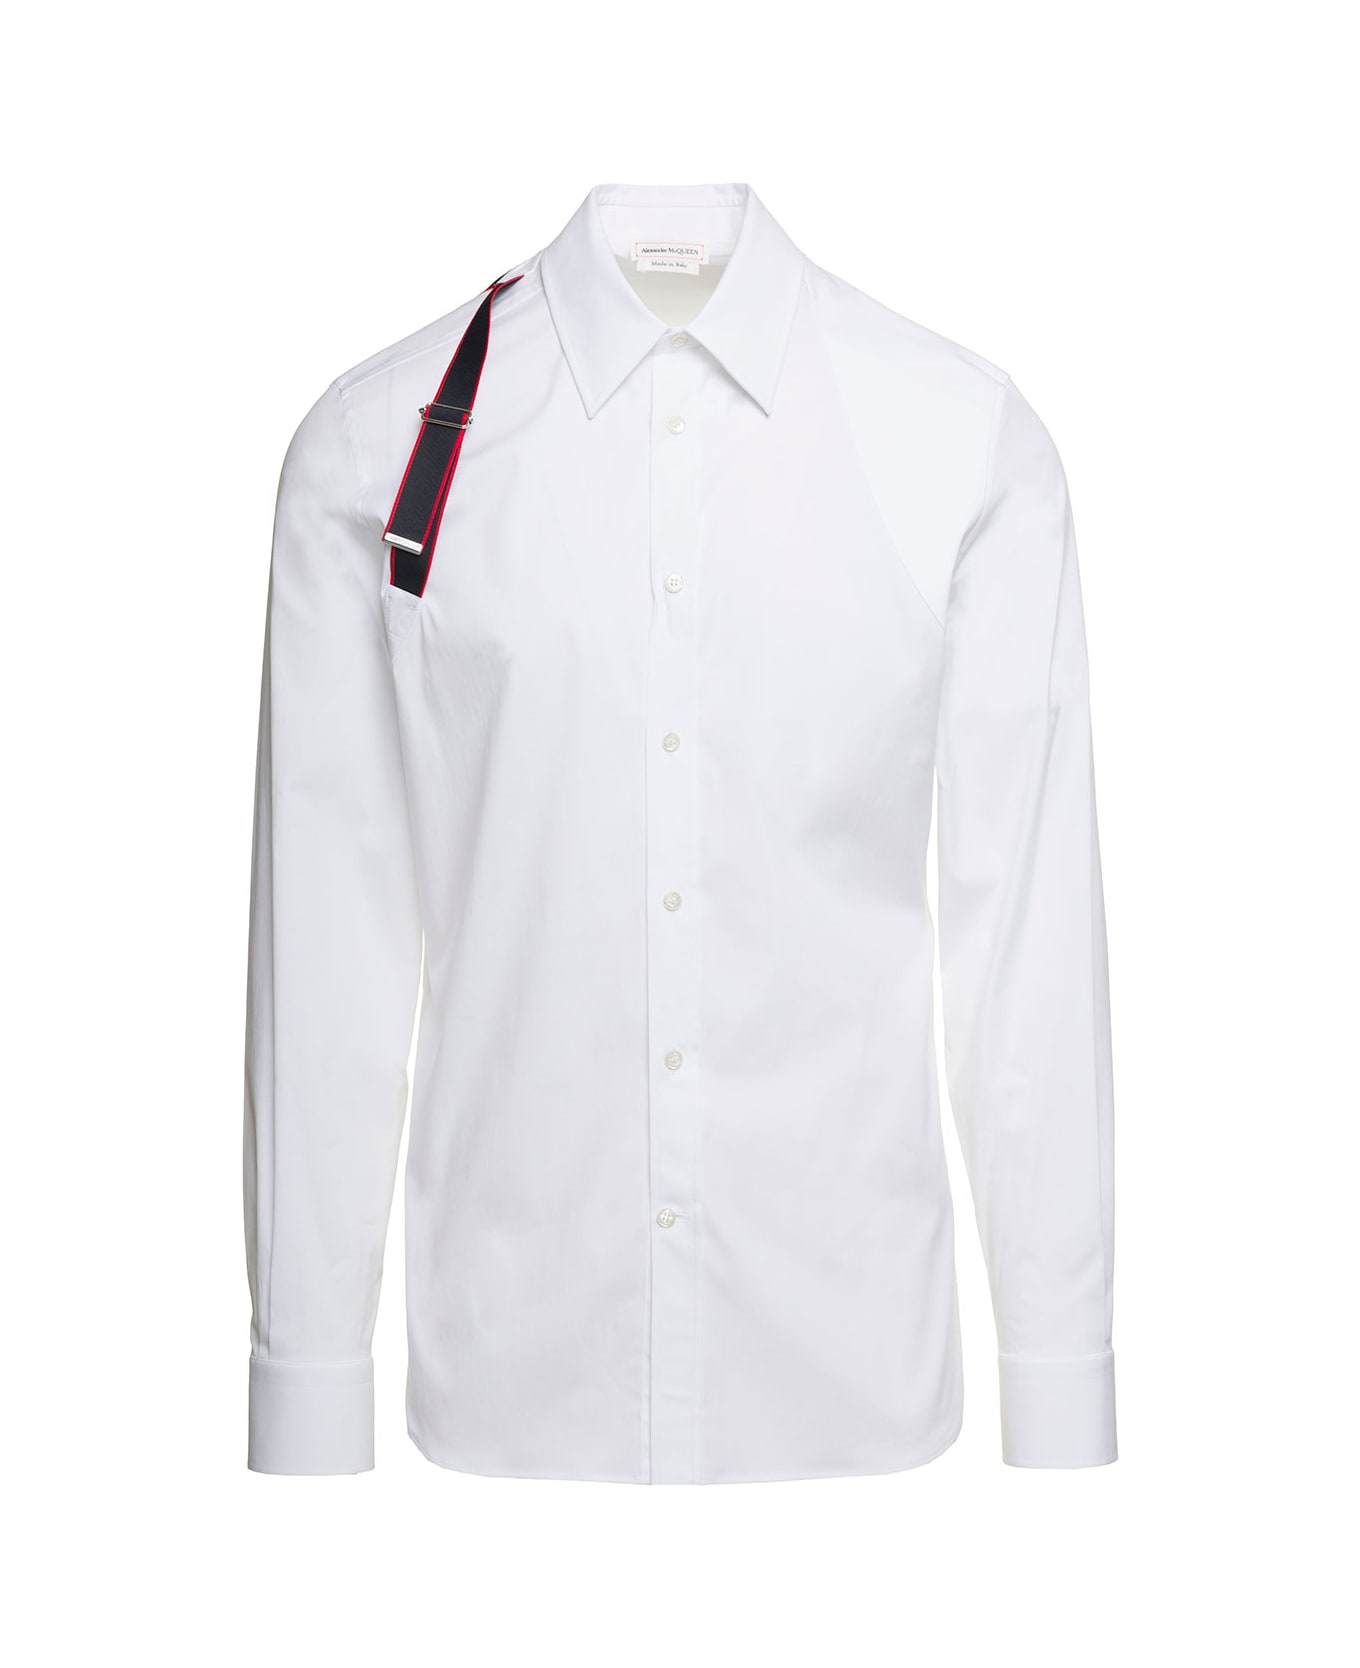 Alexander McQueen White Shirt With Harness Detail In Stretch Cotton Man - White